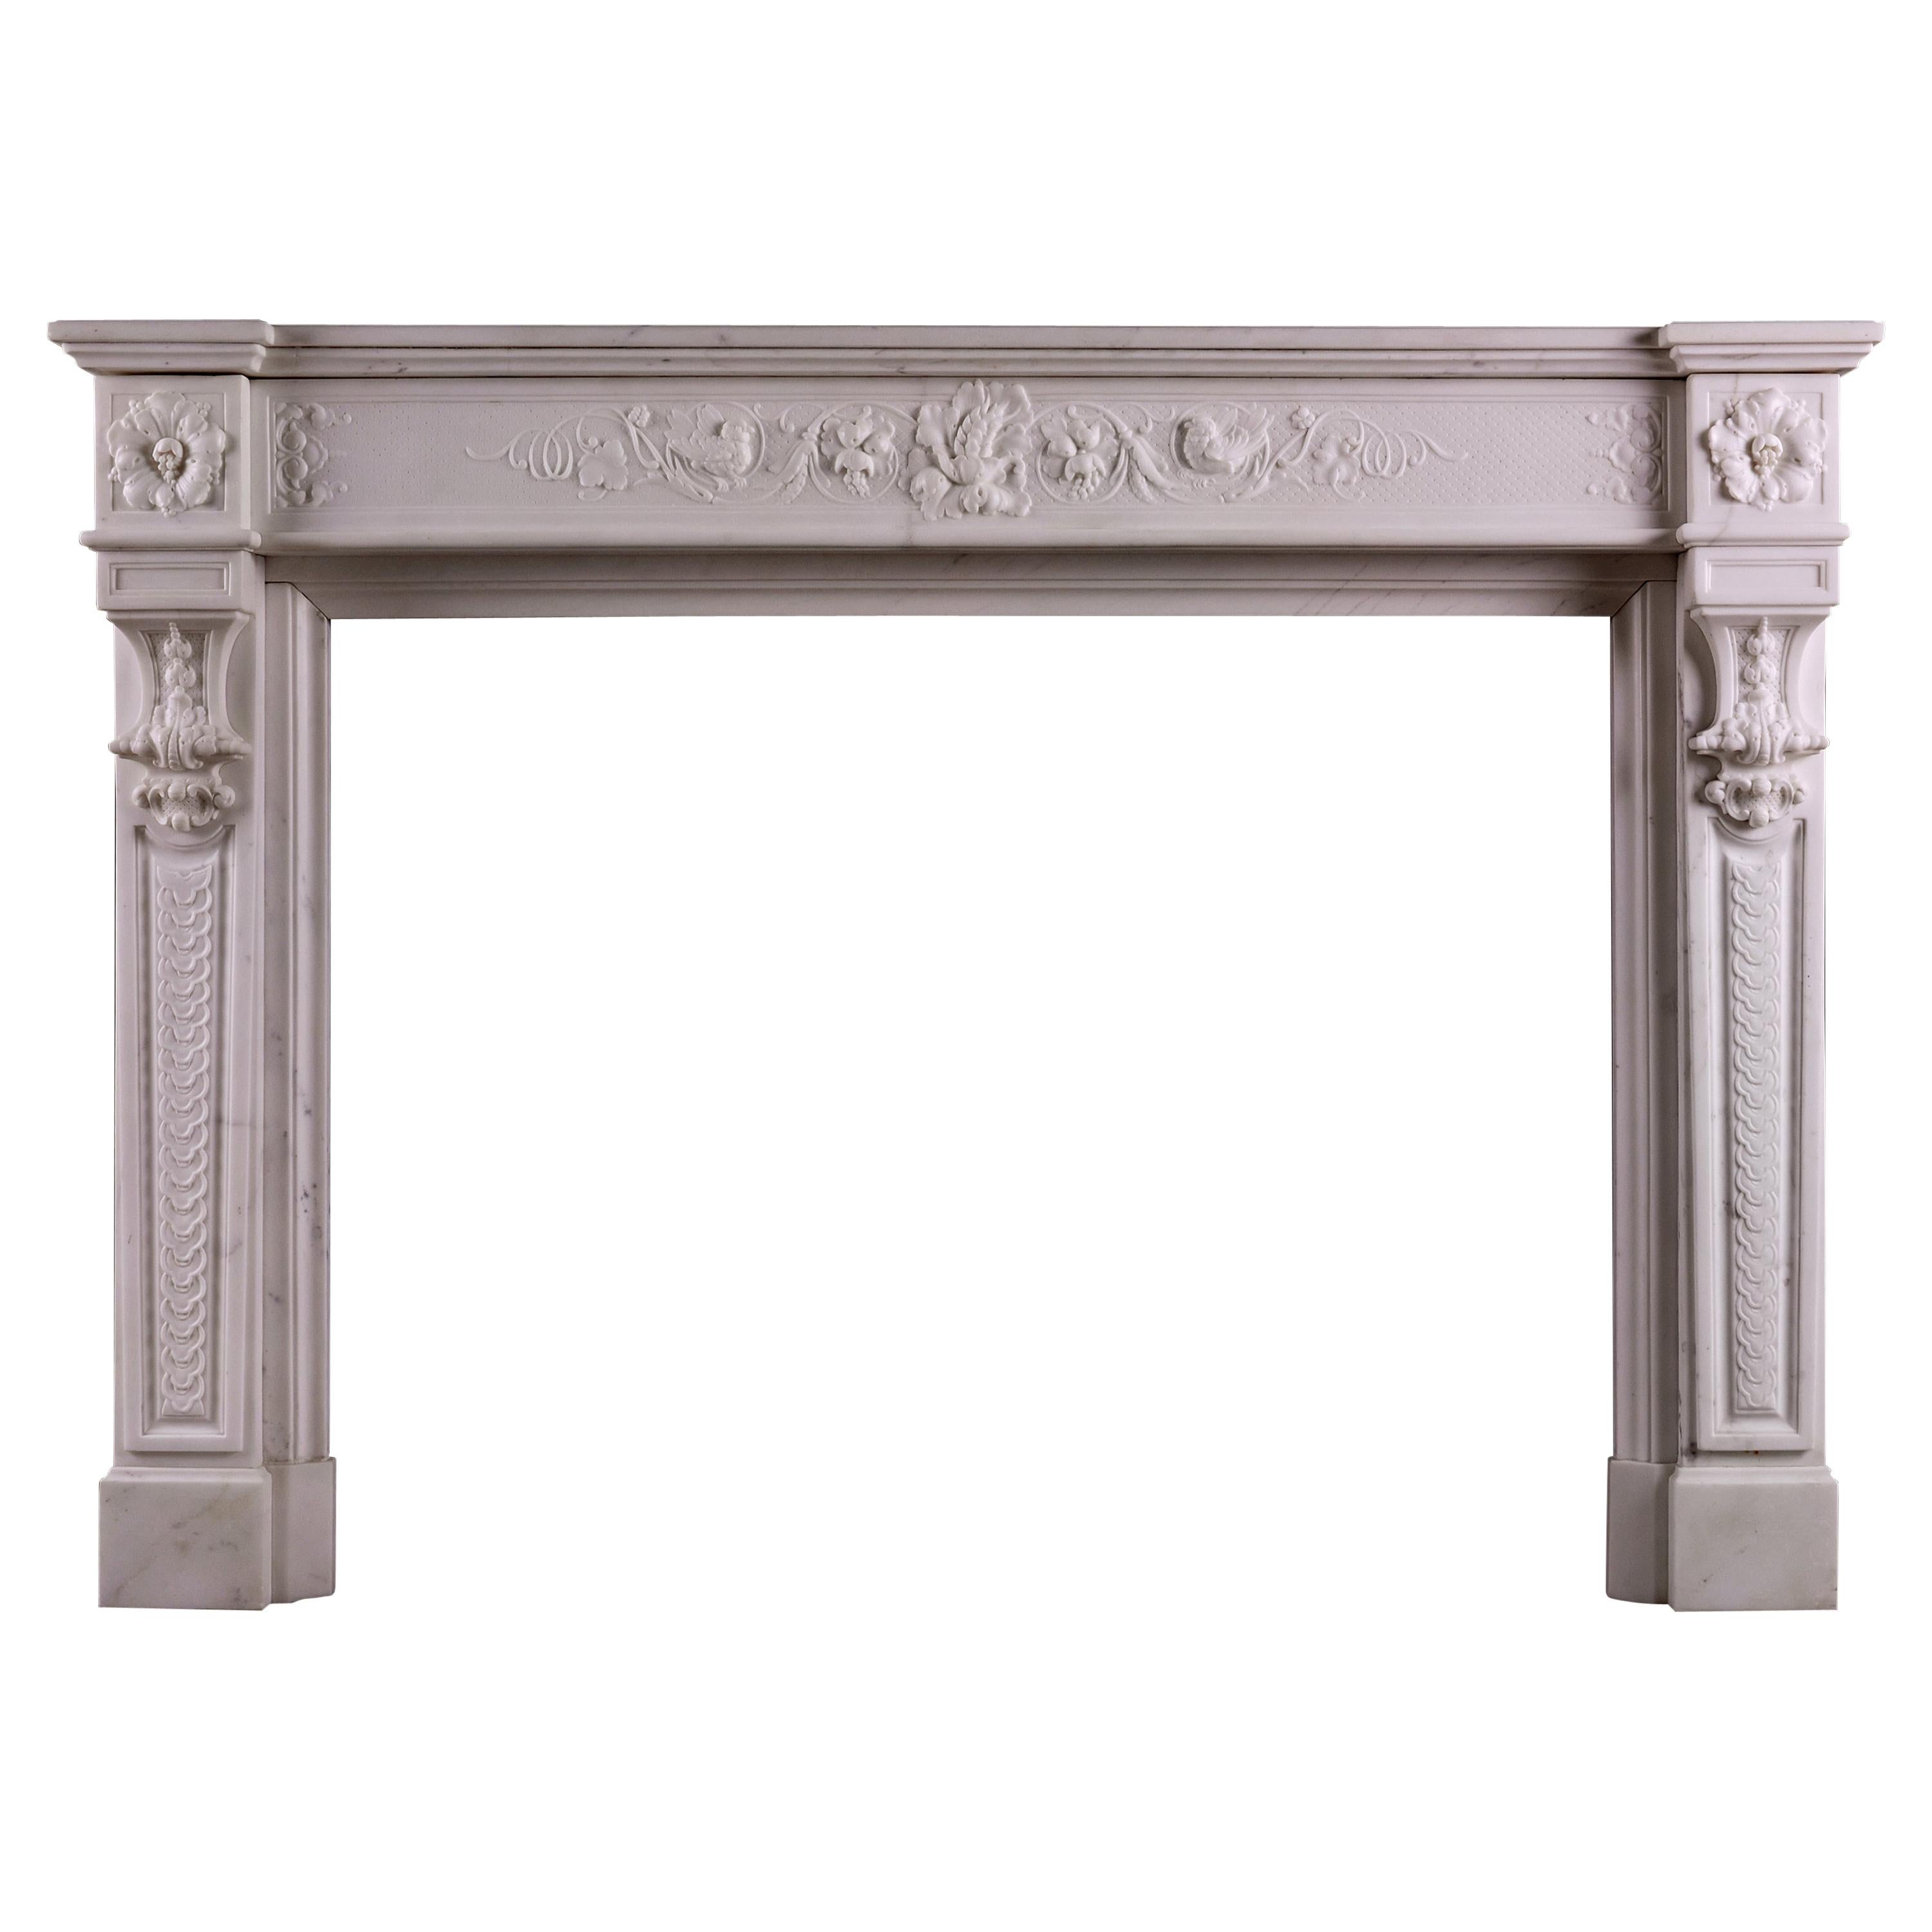 Fine Quality French Statuario Marble Fireplace in the Louis XVI Style For Sale